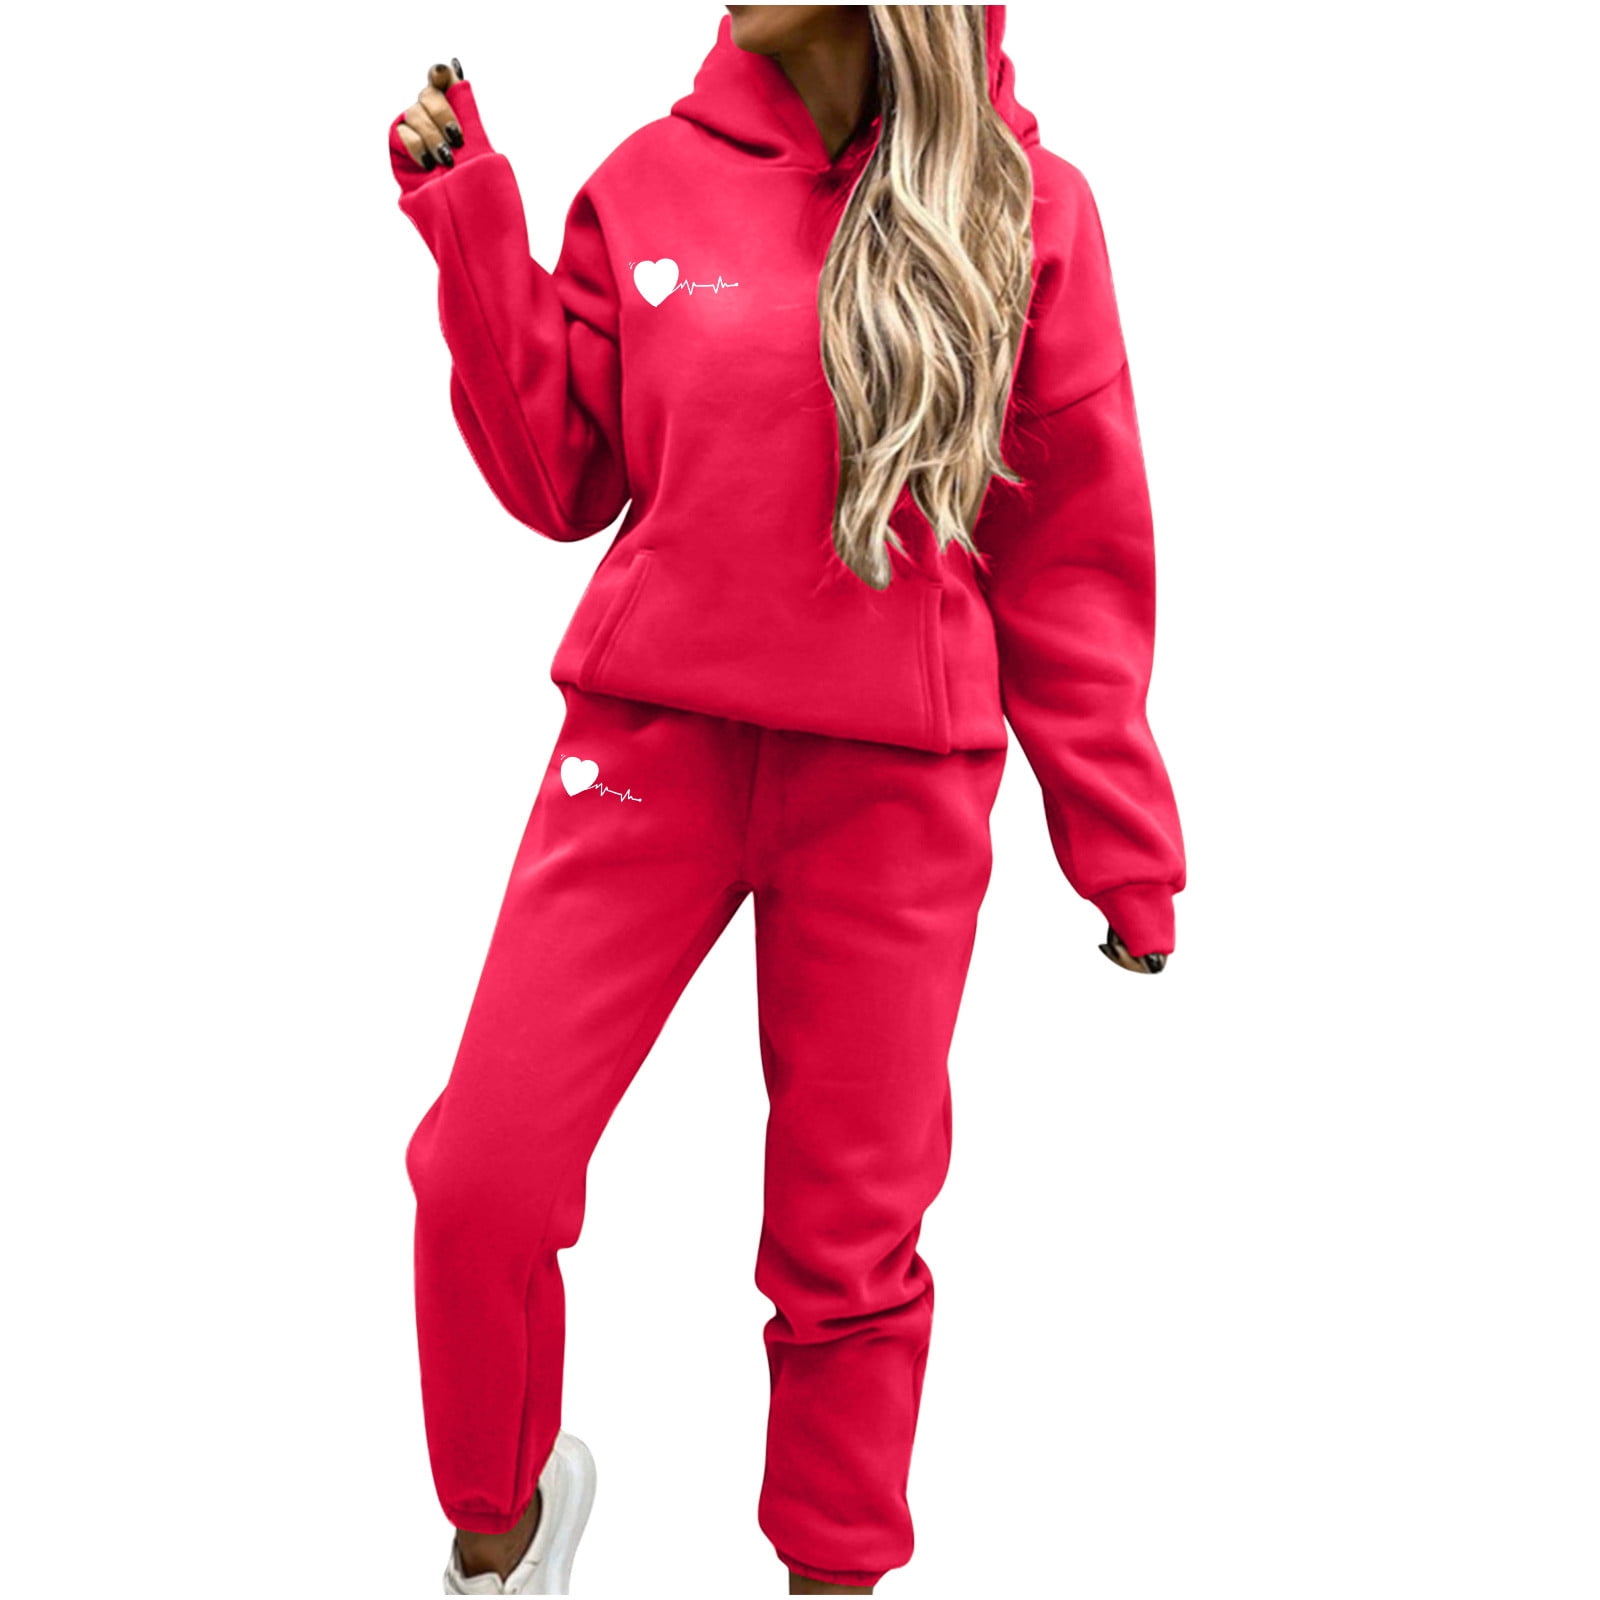 RQYYD Women's Two Piece Outfits Sweatsuit Long Sleeve Hooded Sweatshirt and  Sweatpants Workout Athletic Tracksuits Valentine's Day Loungewear Red XL 